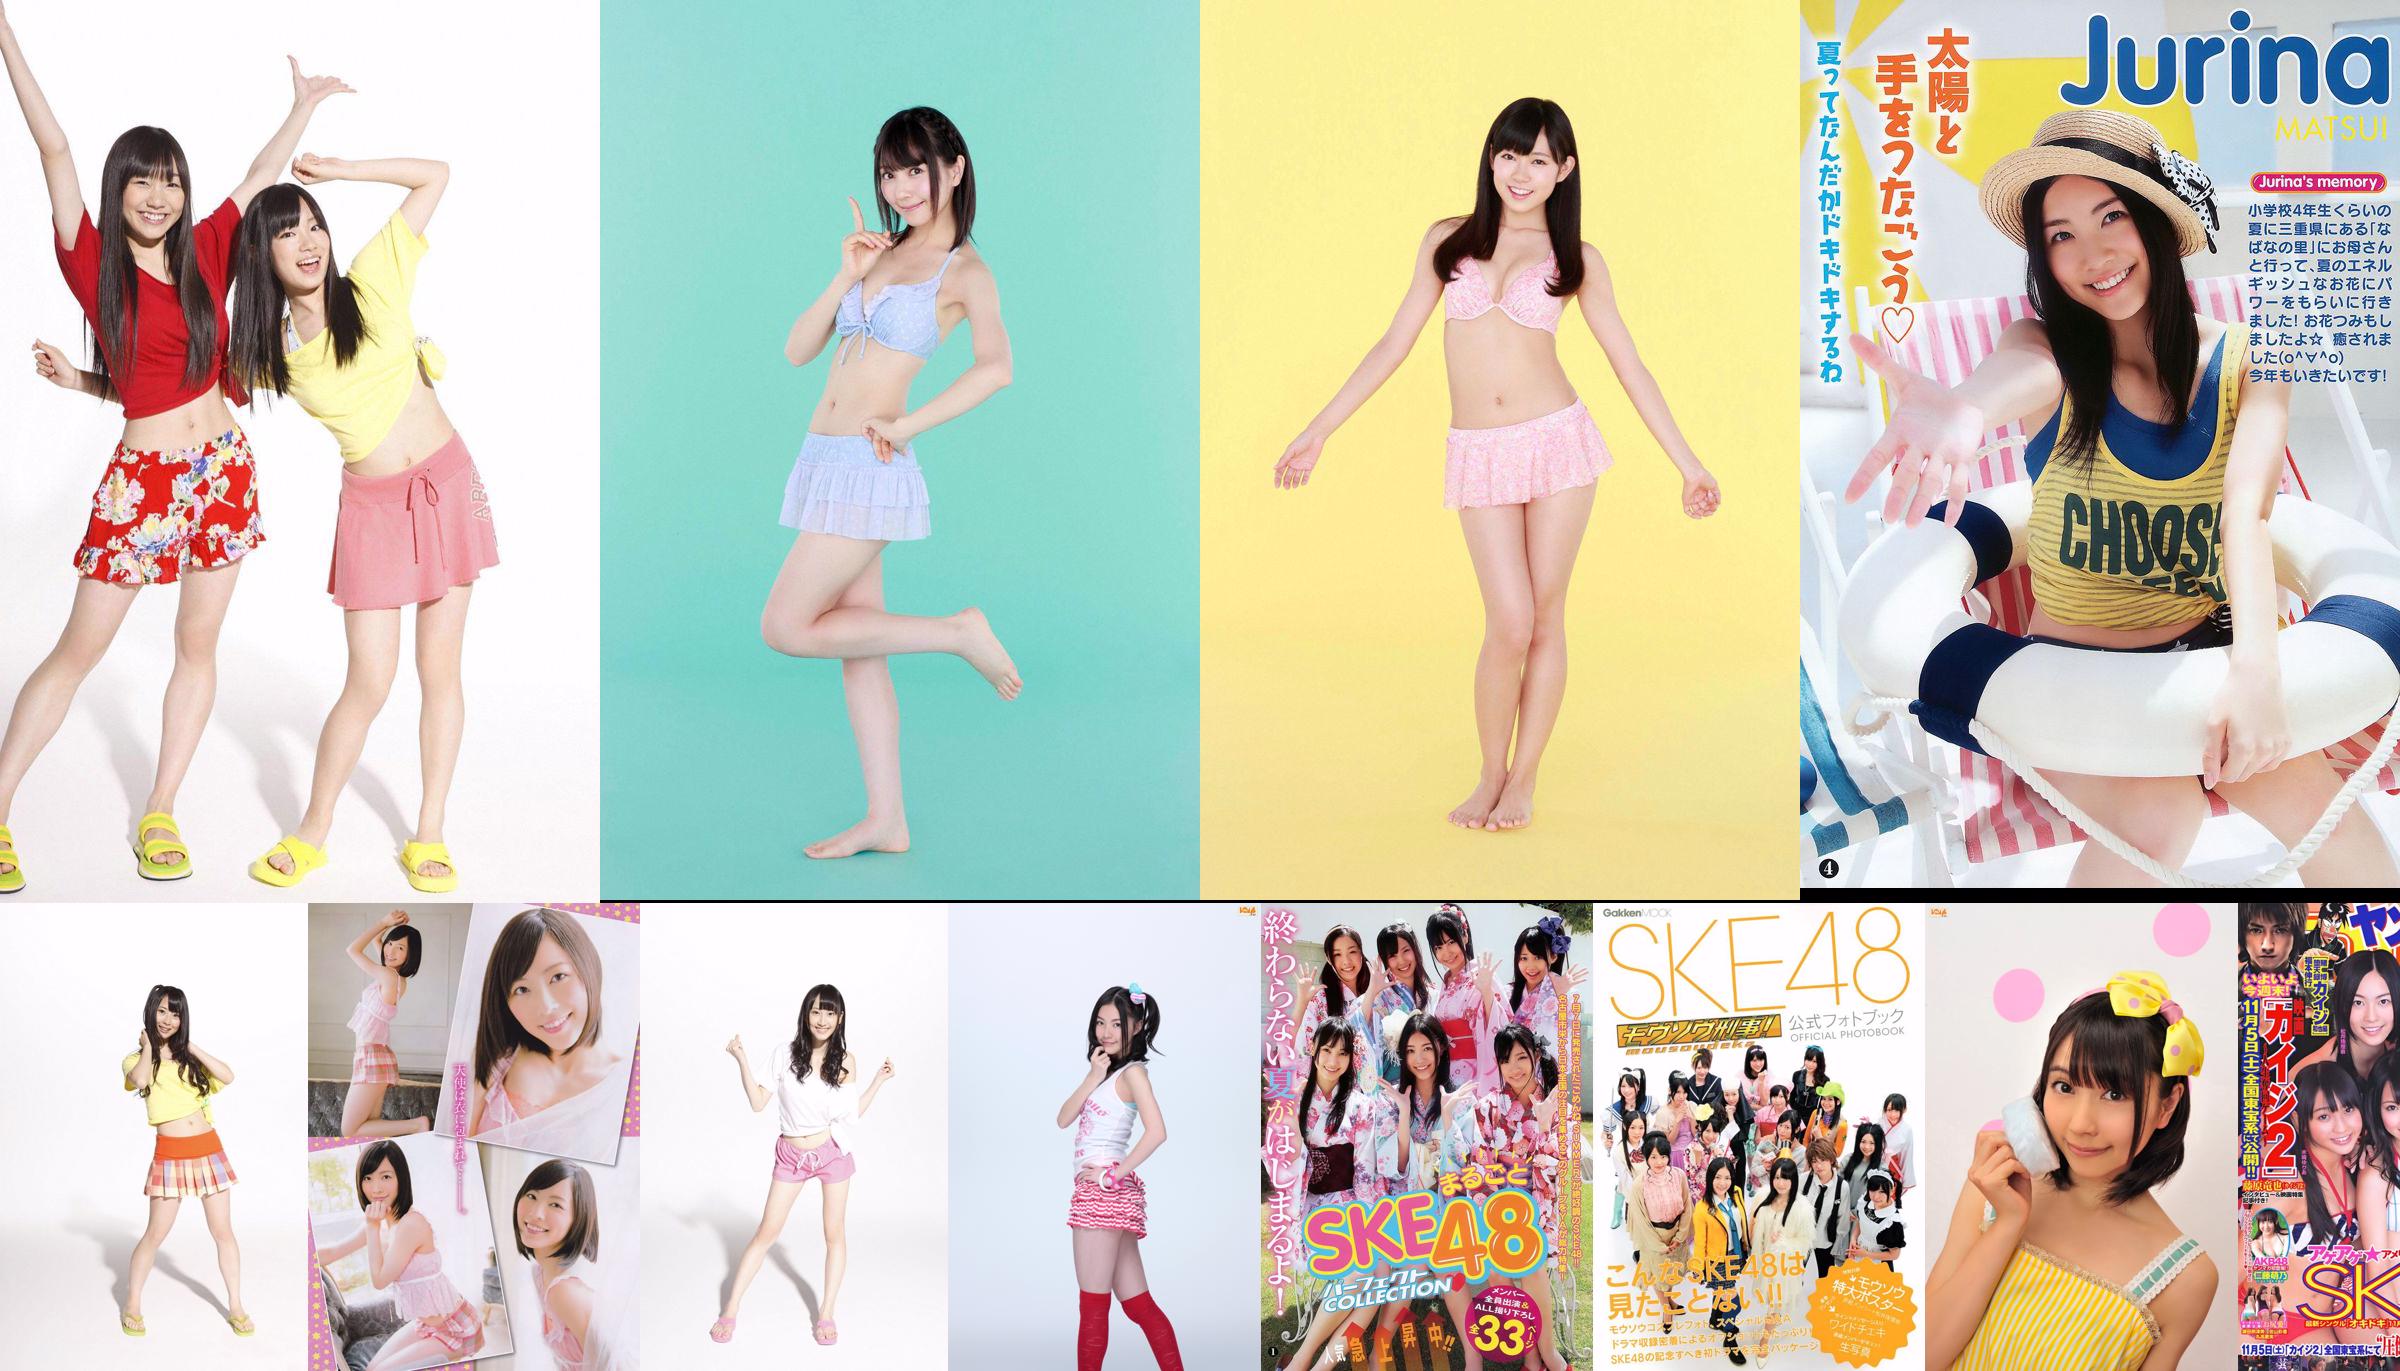 [Bomb.TV] March 2011 issue SKE48 No.c2315f Page 1